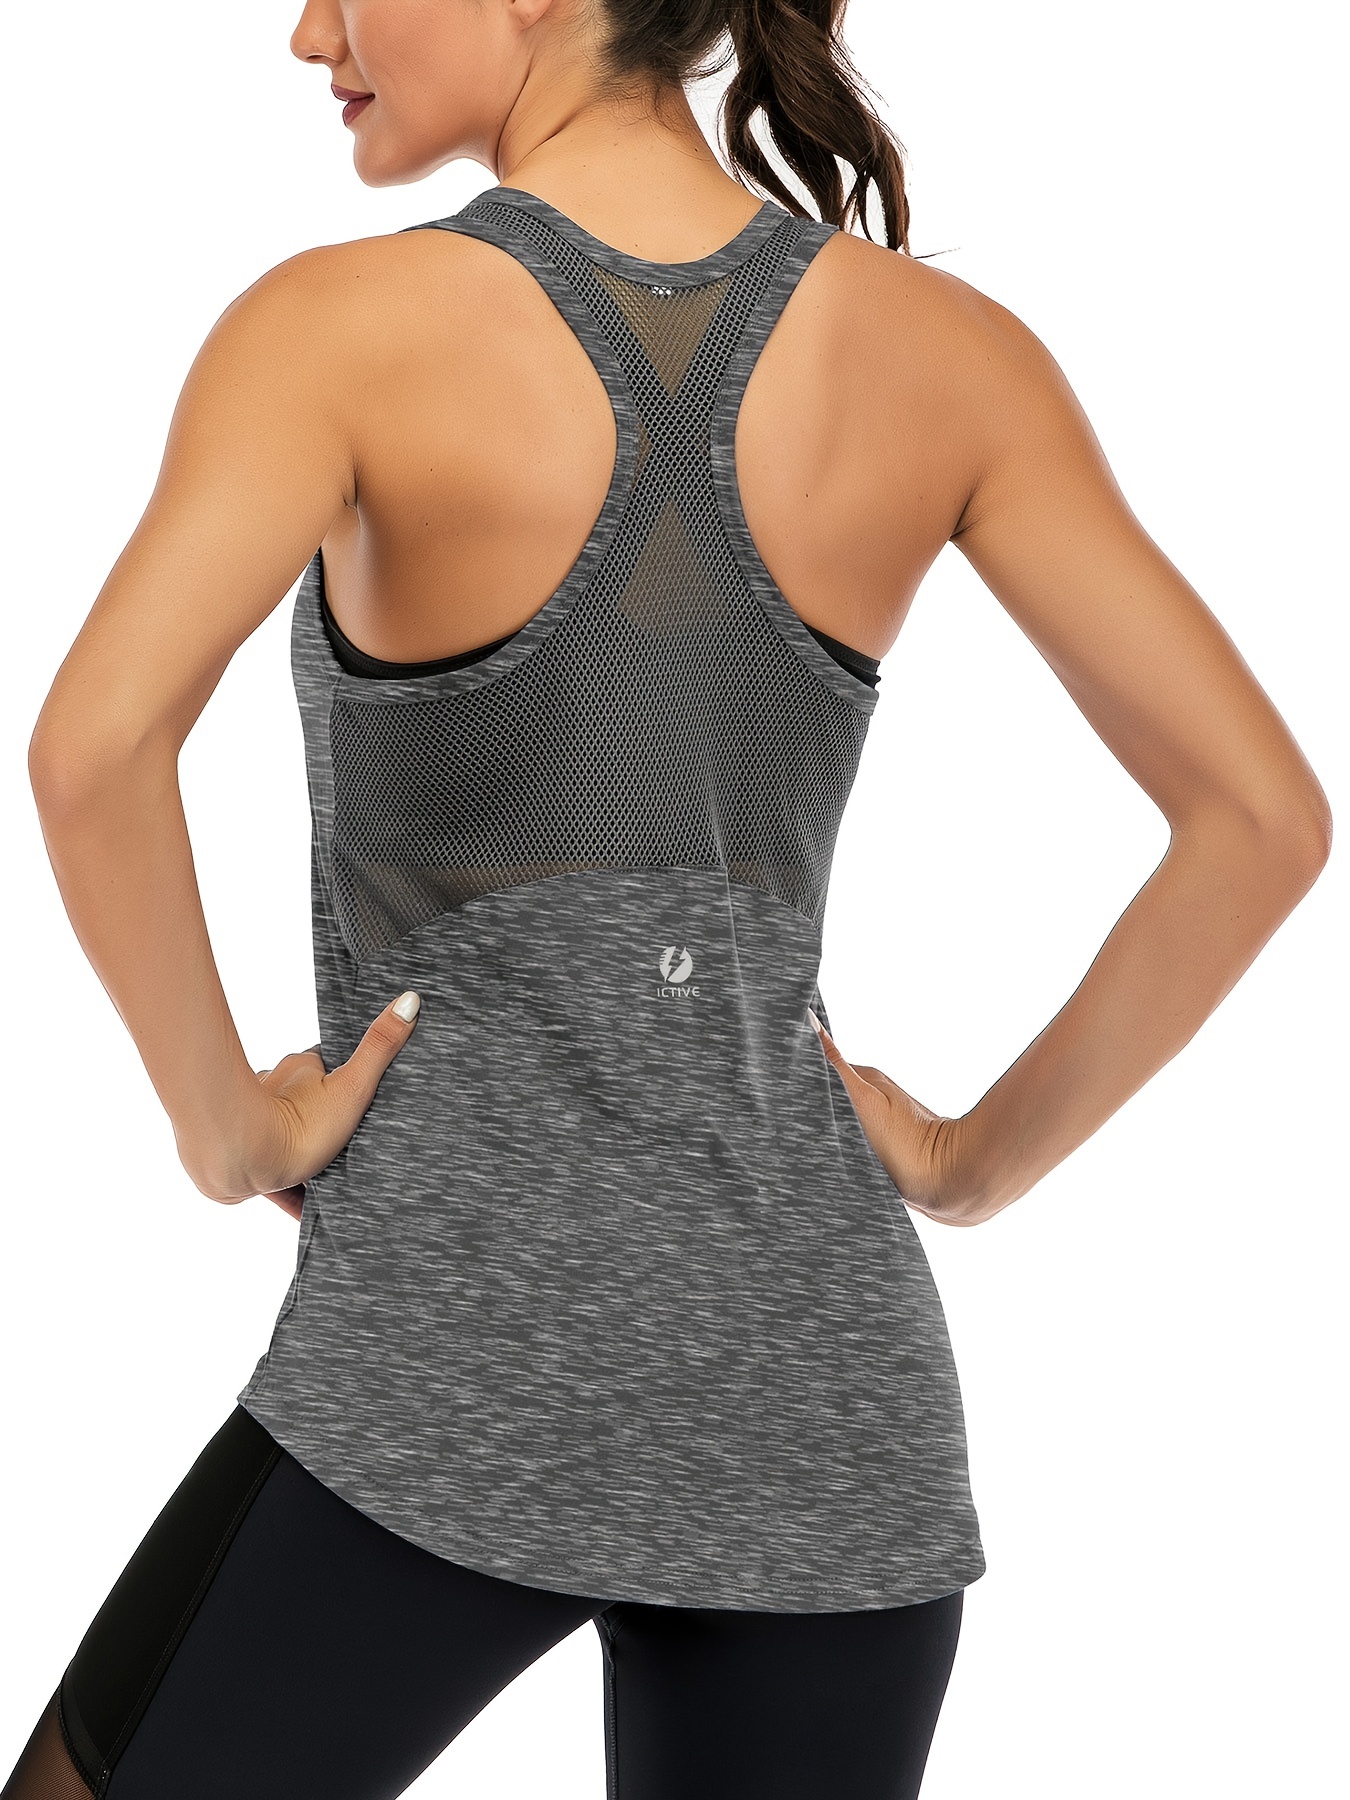  Yoga Tops Mesh Breathable Workout Pilates Tops Racerback  Running Tank Top Loose Open Back Workout Tank Tops Heather Gray XL